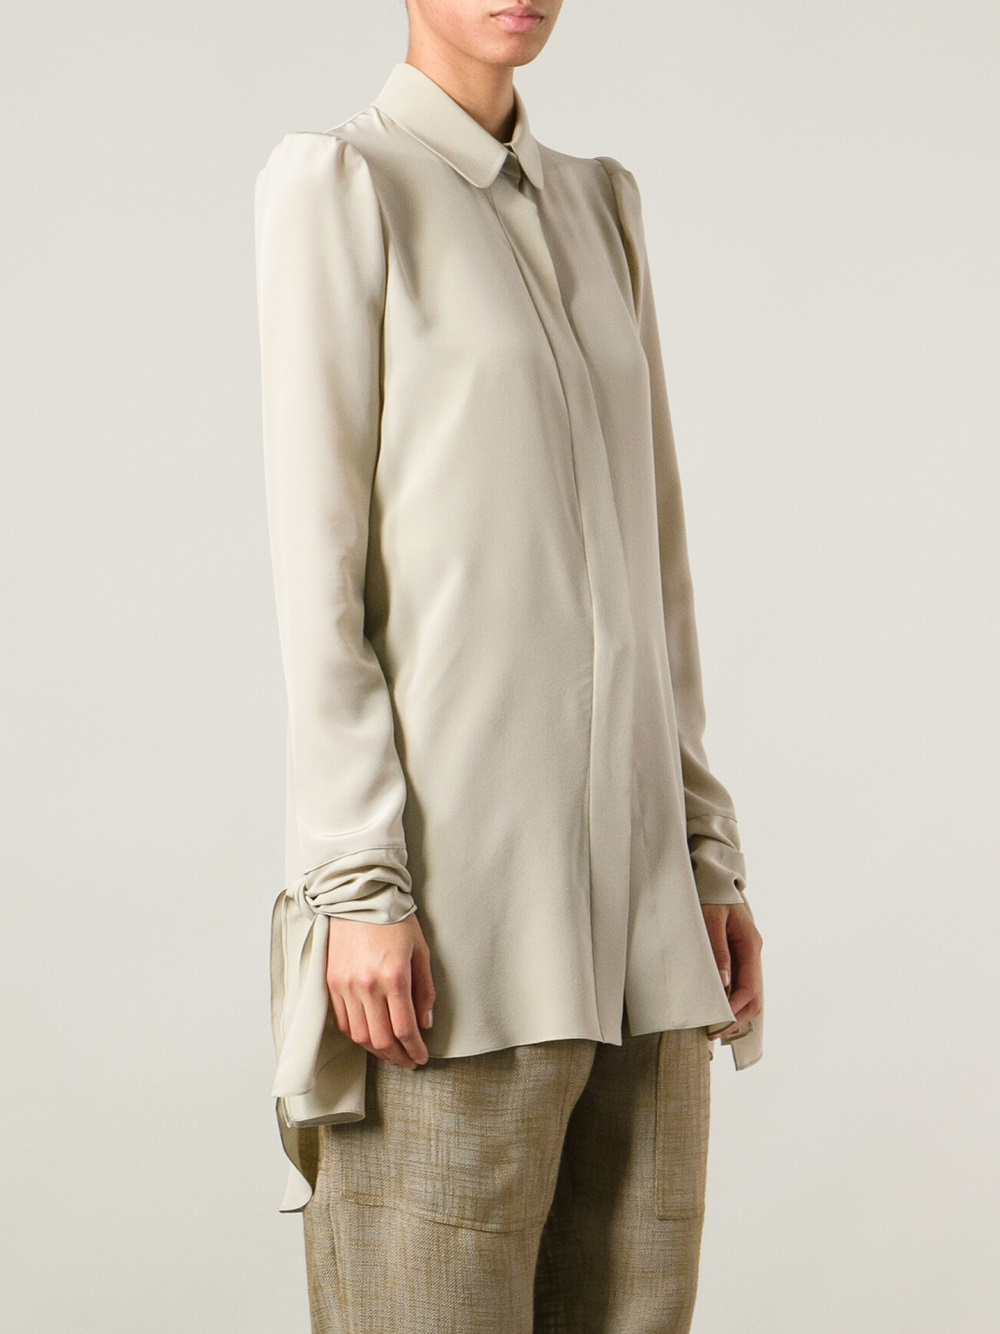 Lyst - Chloé Olive Tree Blouse in Natural